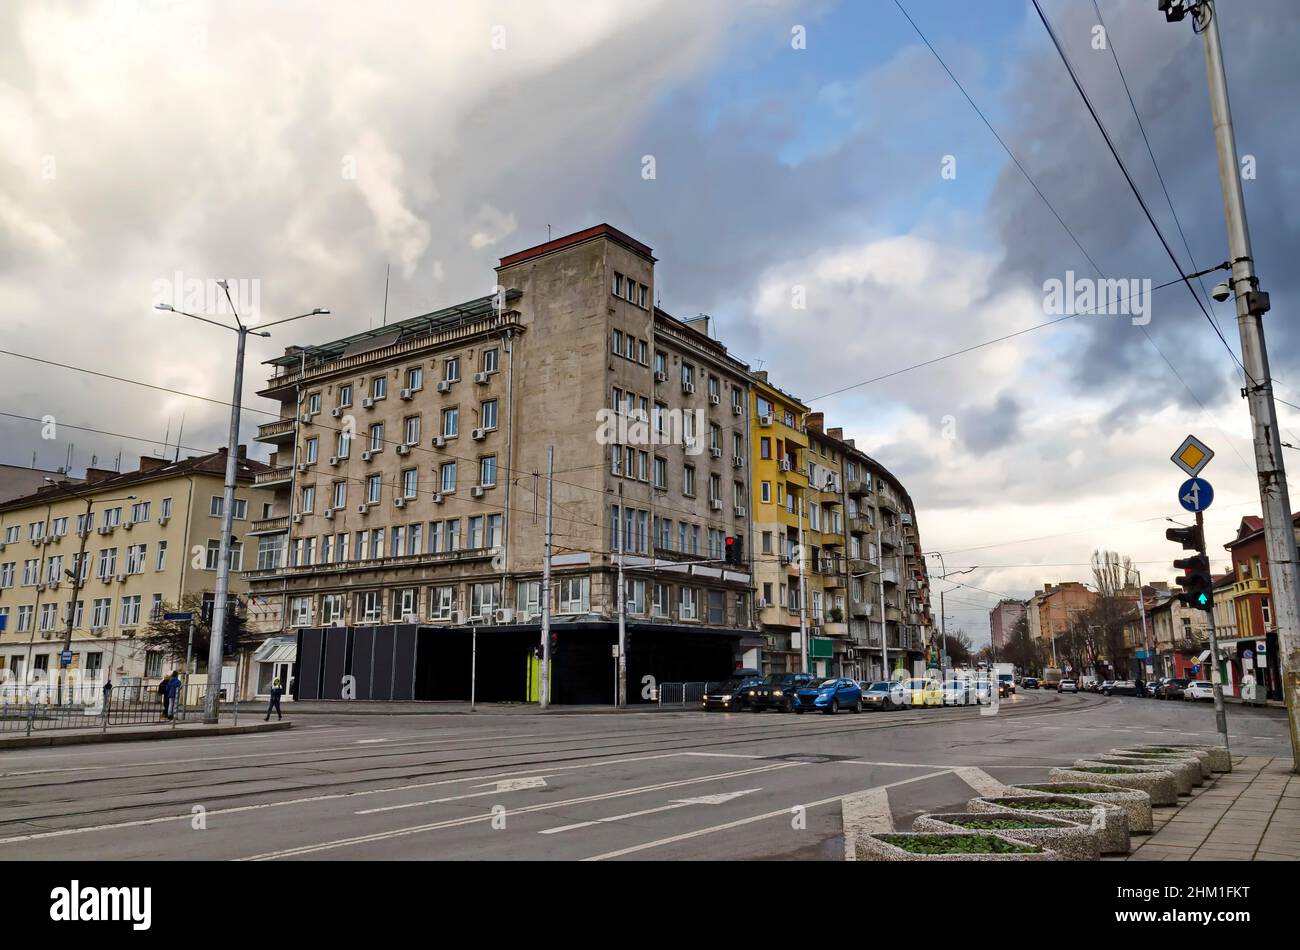 Residential district with old houses from the XX century, Small City Theater and crossroads with traffic lights, Sofia, Bulgaria Stock Photo